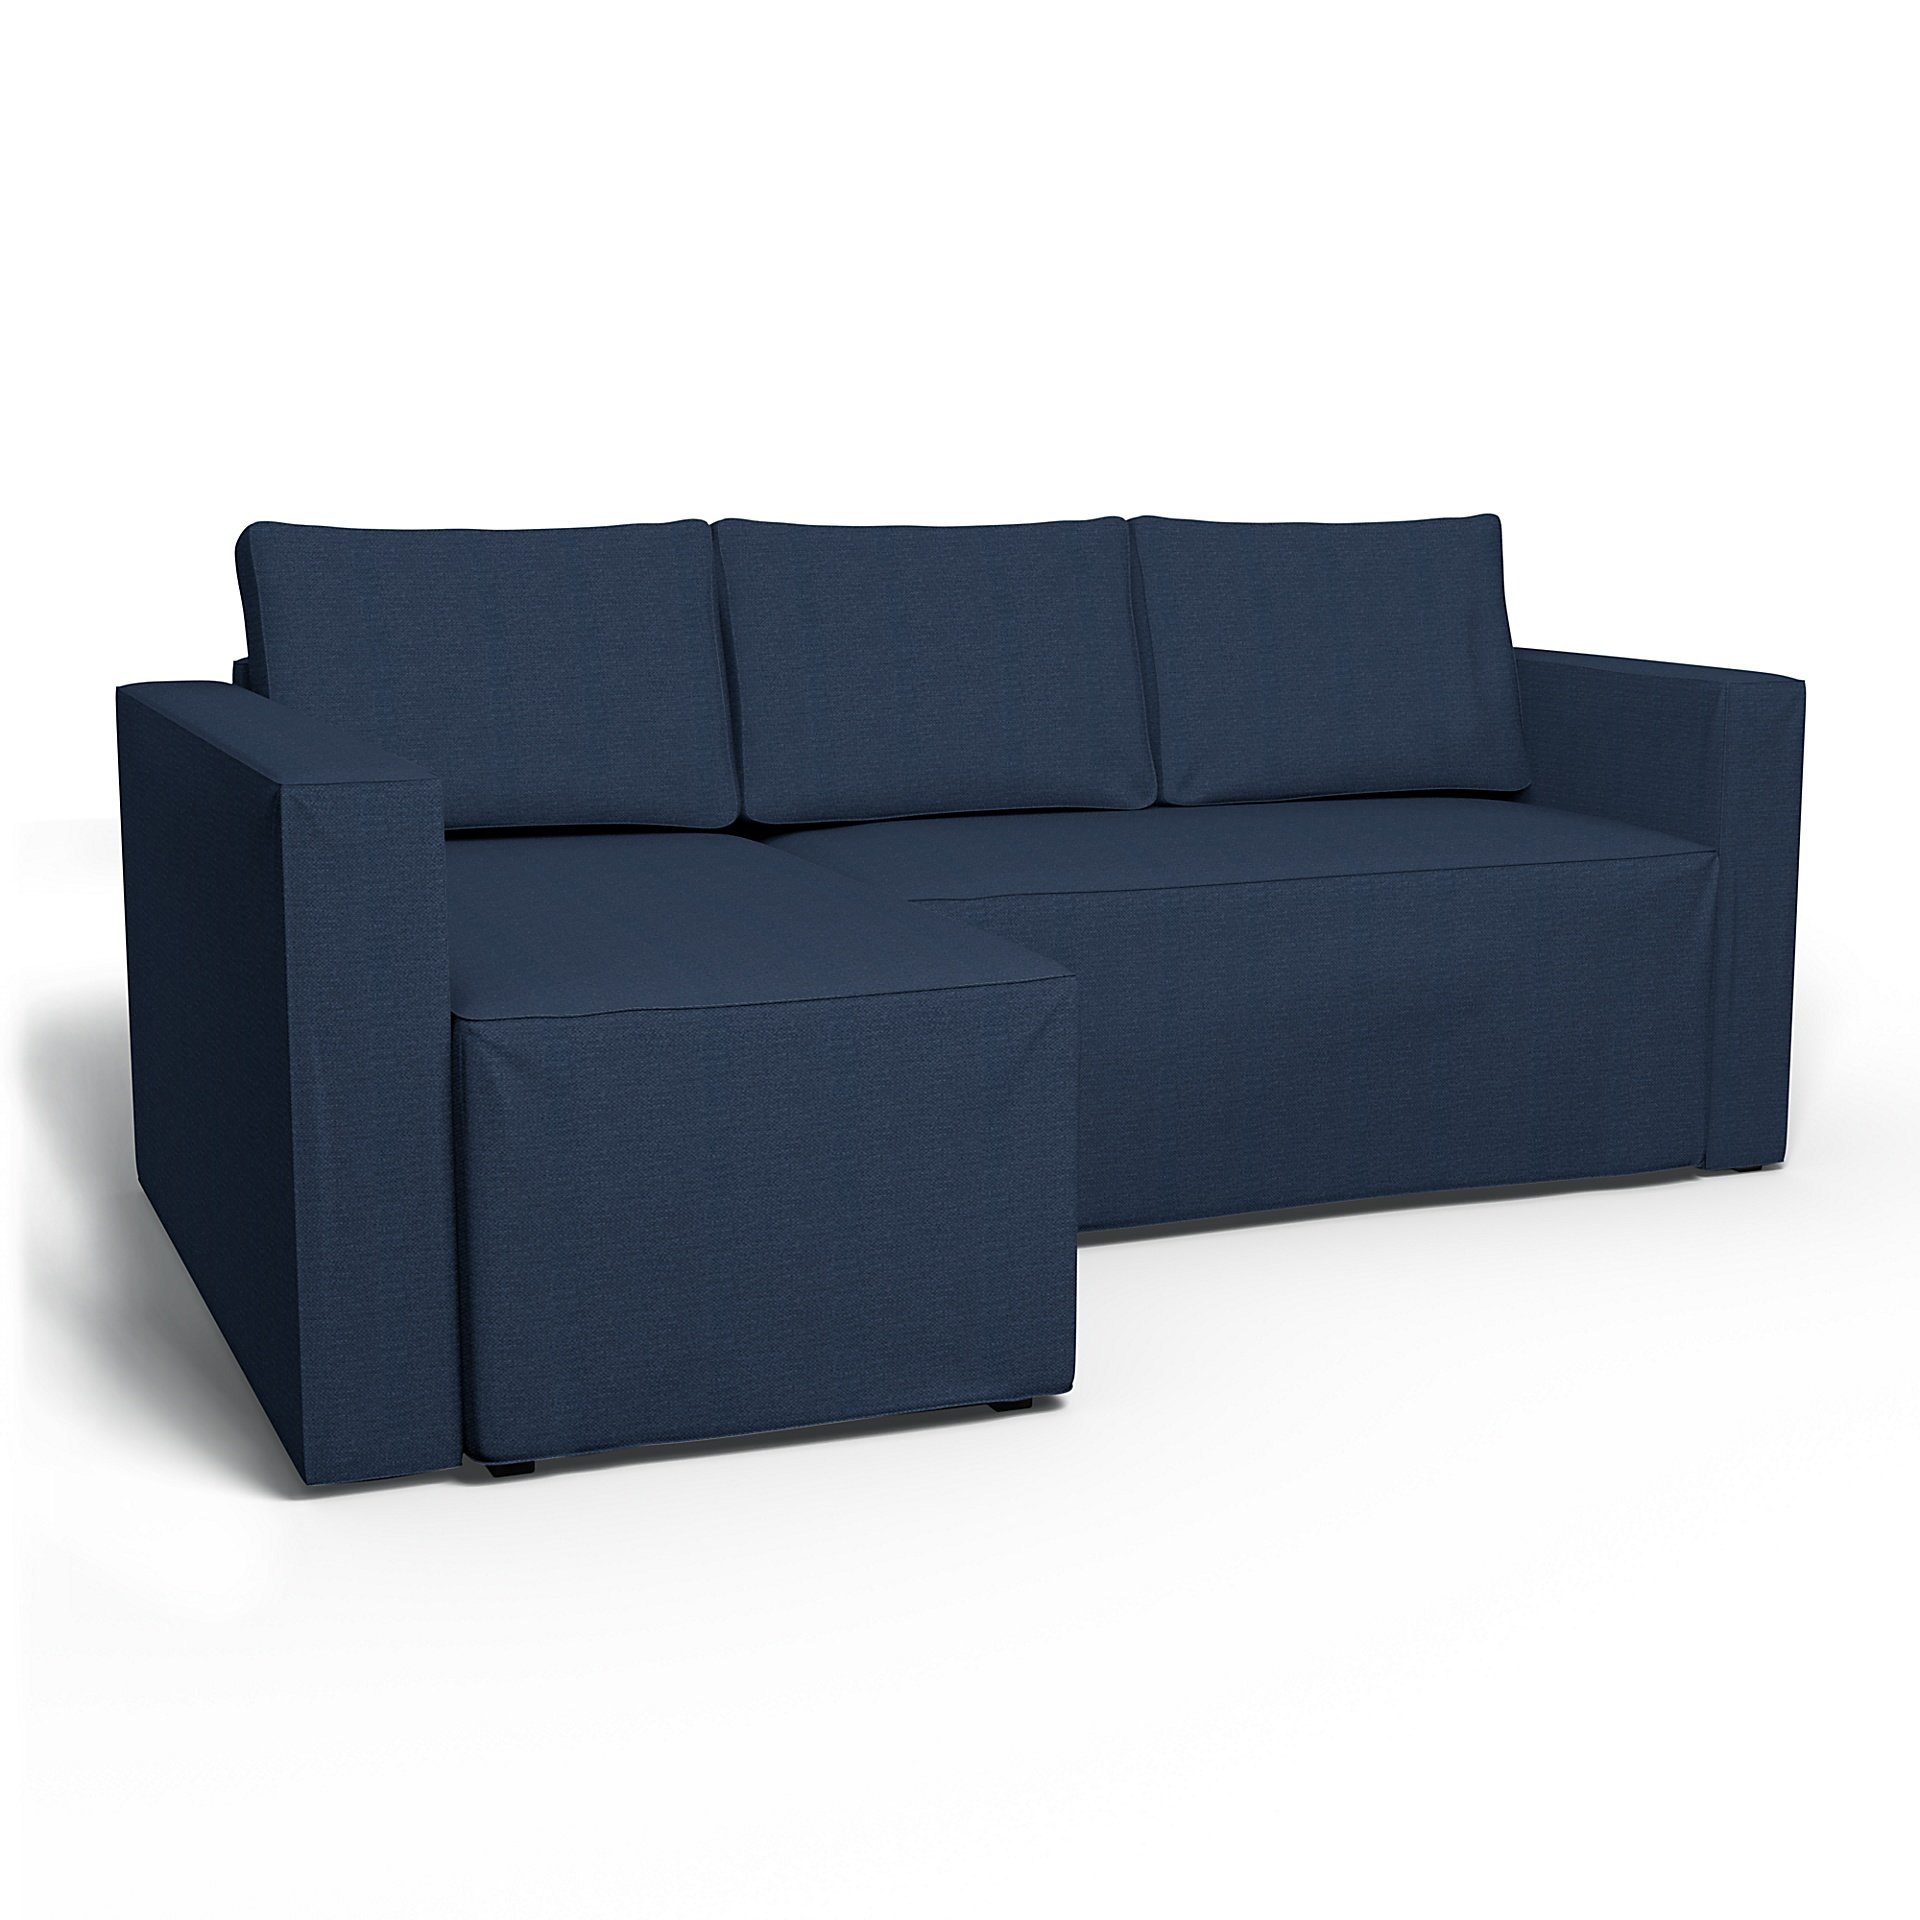 IKEA - Manstad Sofa Bed with Left Chaise Cover, Navy Blue, Linen - Bemz